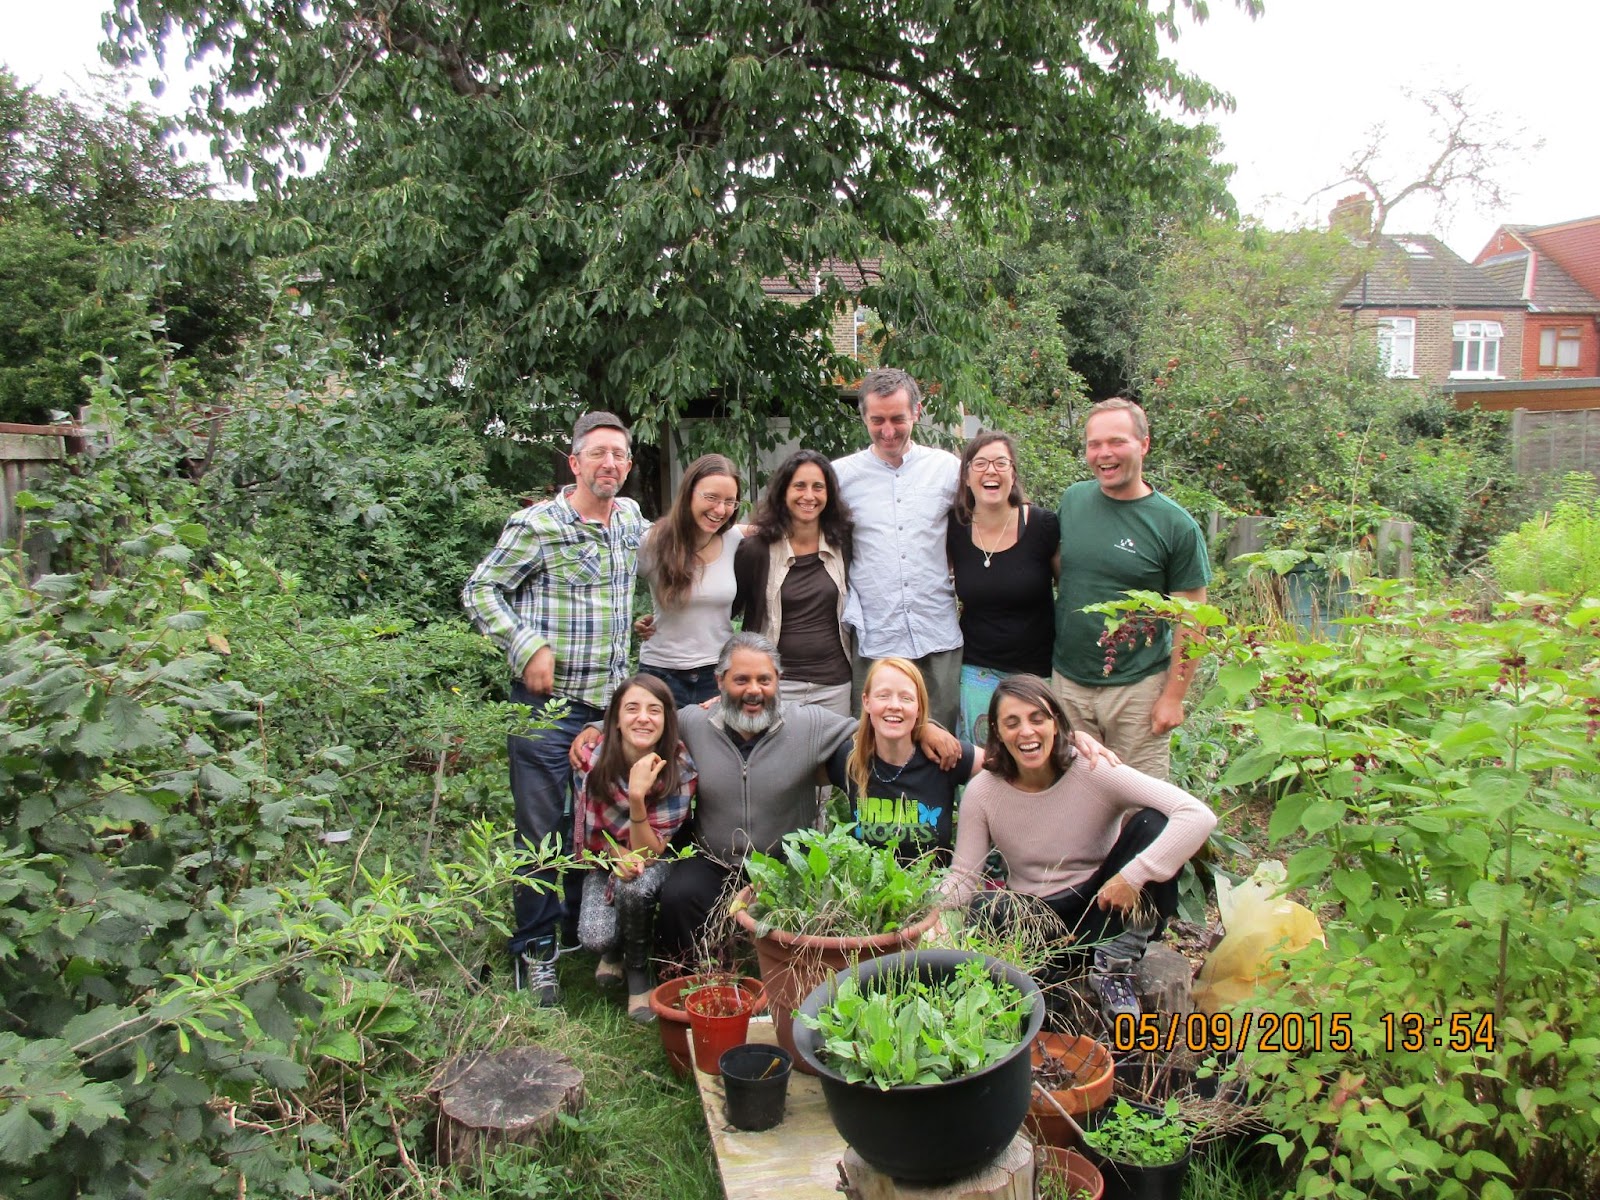 Picture 2 - September 2015 first funded meeting, in London. Back row from left: Andy, Tereza, Gaye, John, Lara, Tomi. Front row from left: Eva, Rakesh, Lusi, Valentina